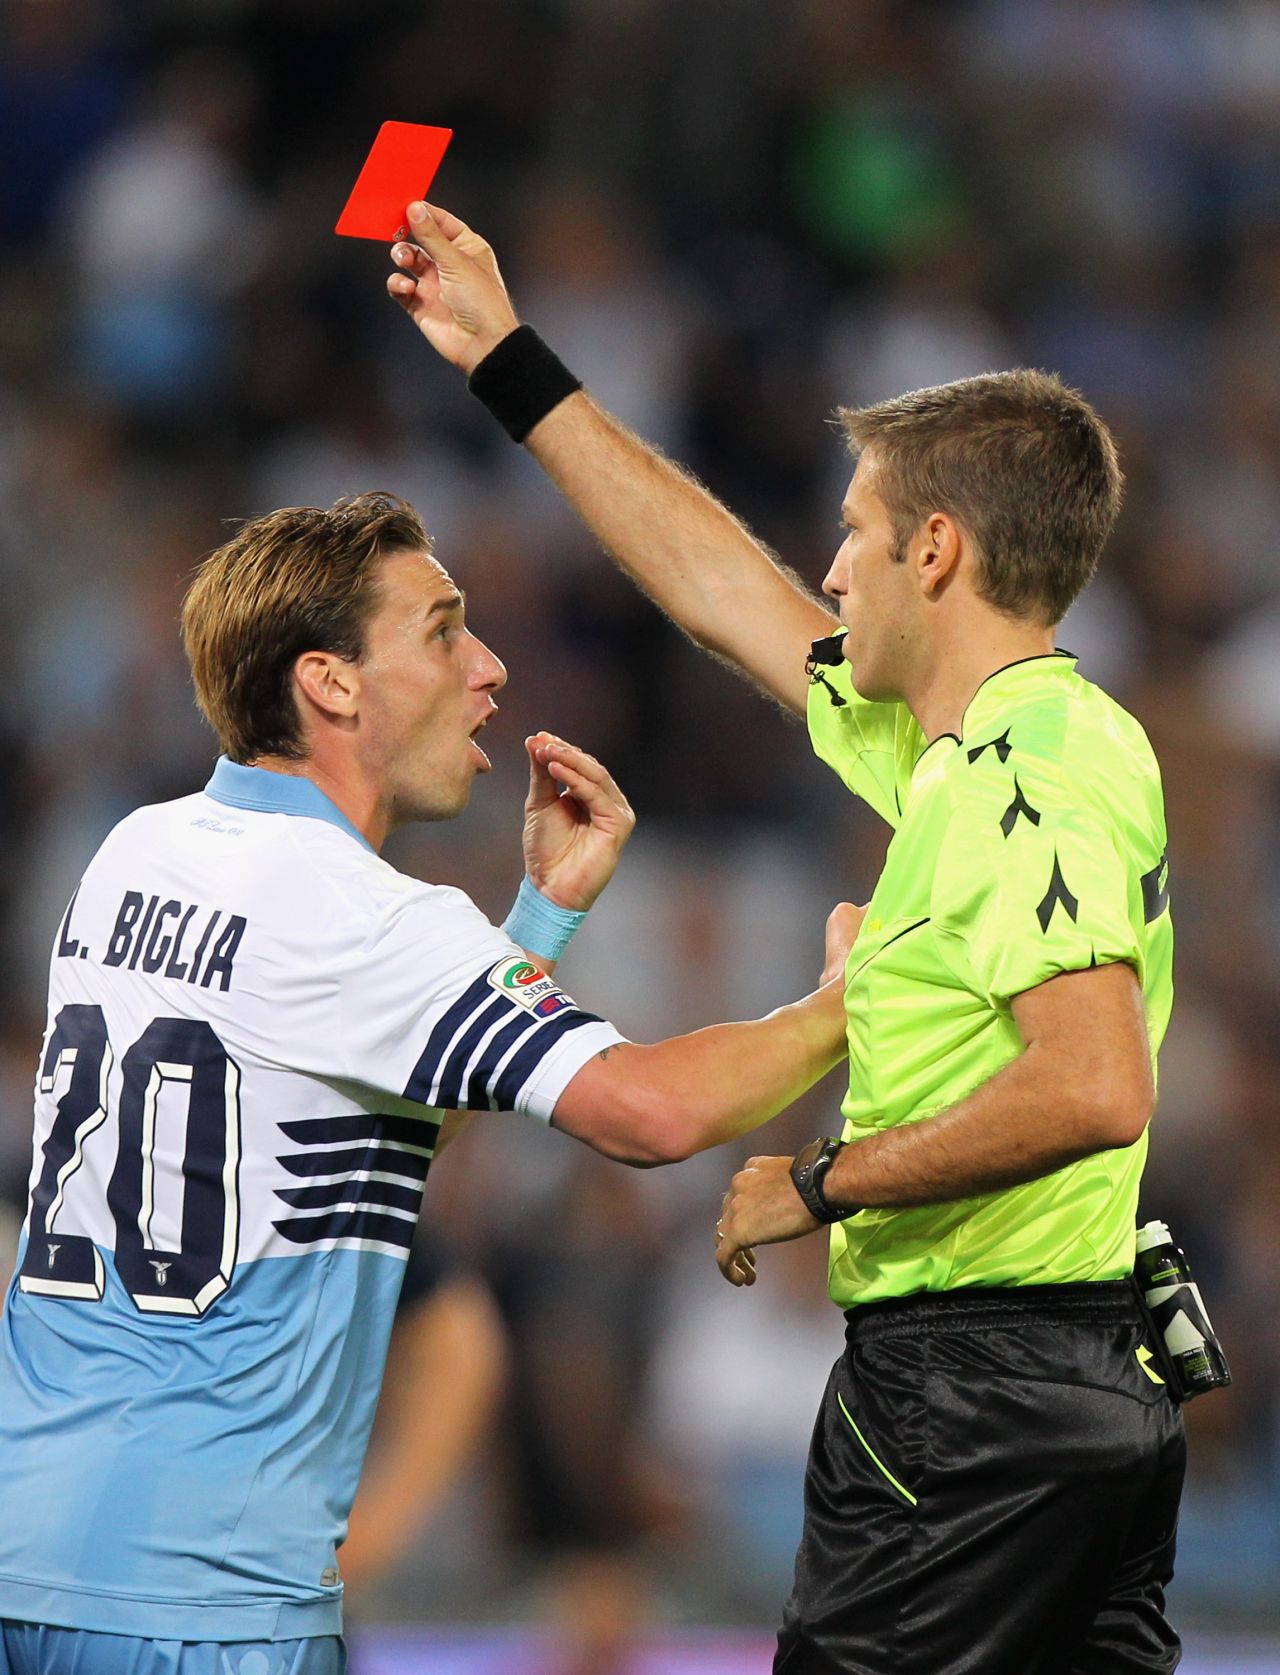 Lucas Biglia remonstrates with referee Davide Massa after Mauricio's sending off in the first half in the game between Lazio and Inter Milan. Lazio would go on to finish the game with nine men after Federico Marchetti saw red in the second half.